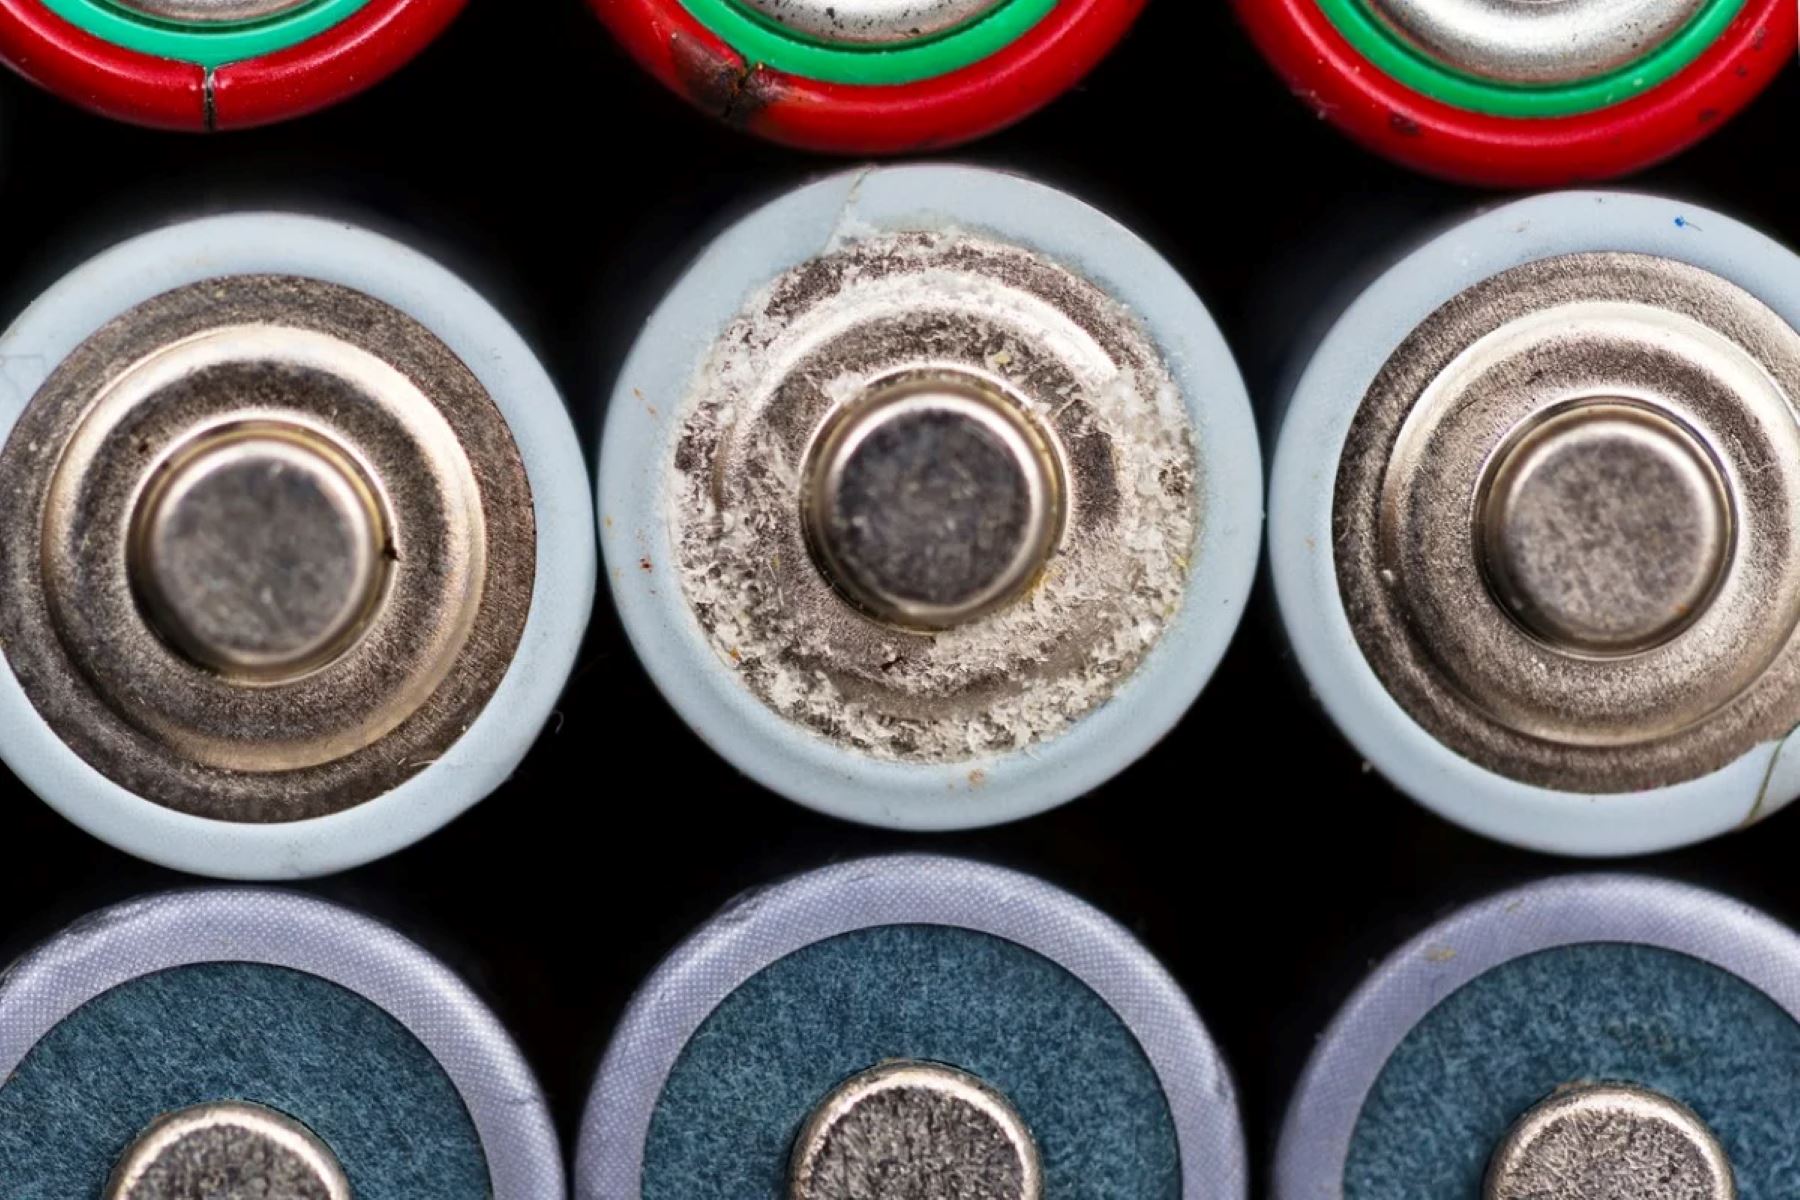 Dealing With Leaks: A Guide To Cleaning Leaking Batteries